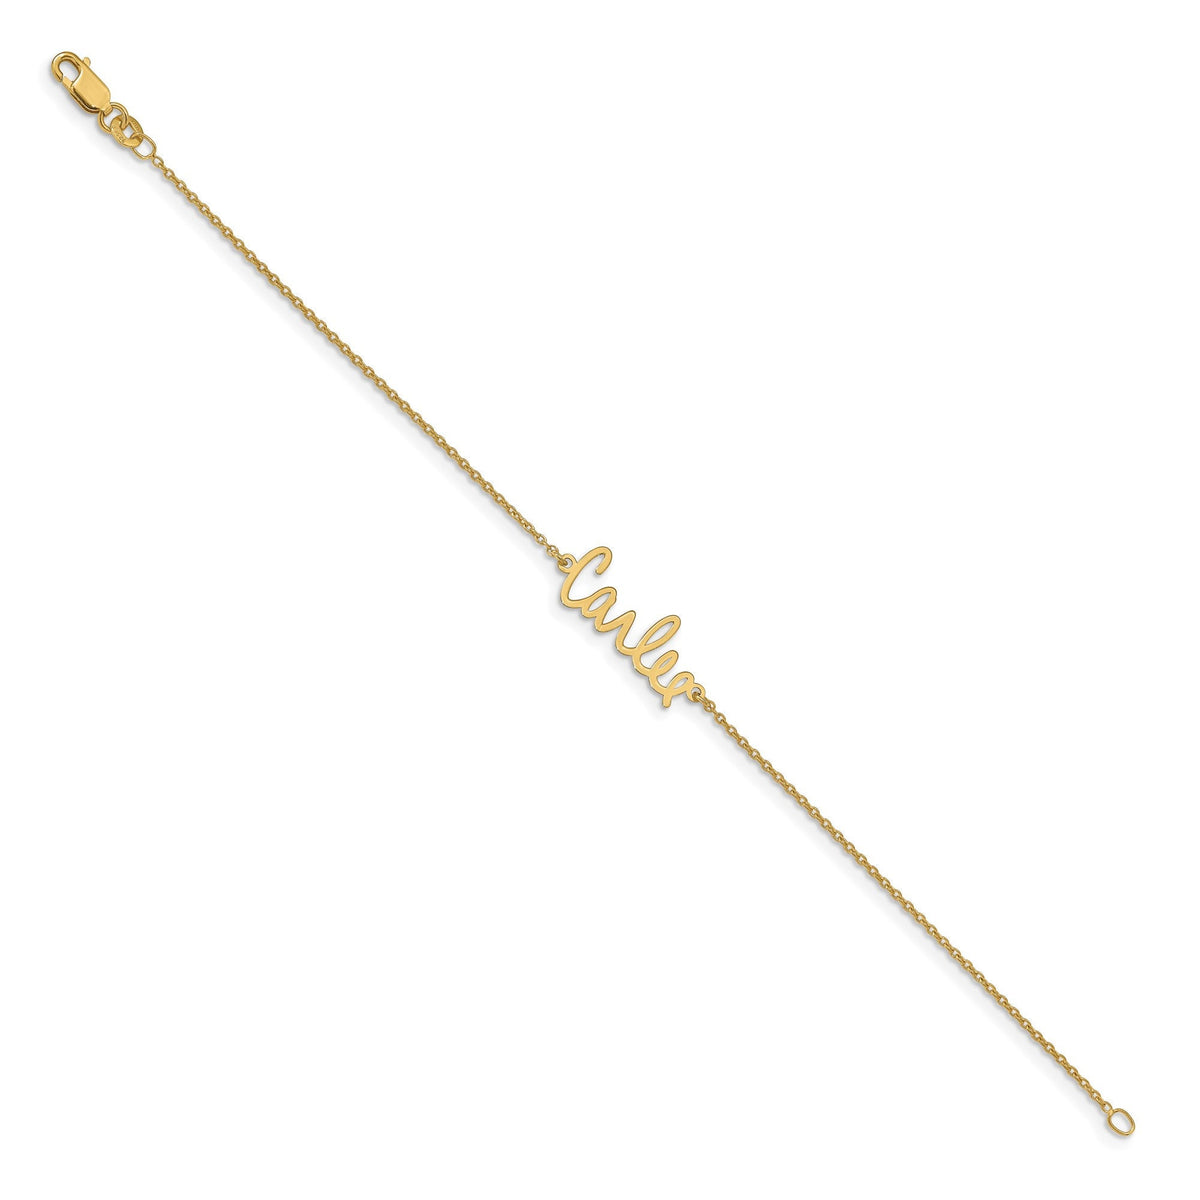 Your Signature Anklet 9 inches or 10 inches in 14k Yellow or White Gold  - Gift Box Included - Made In USA